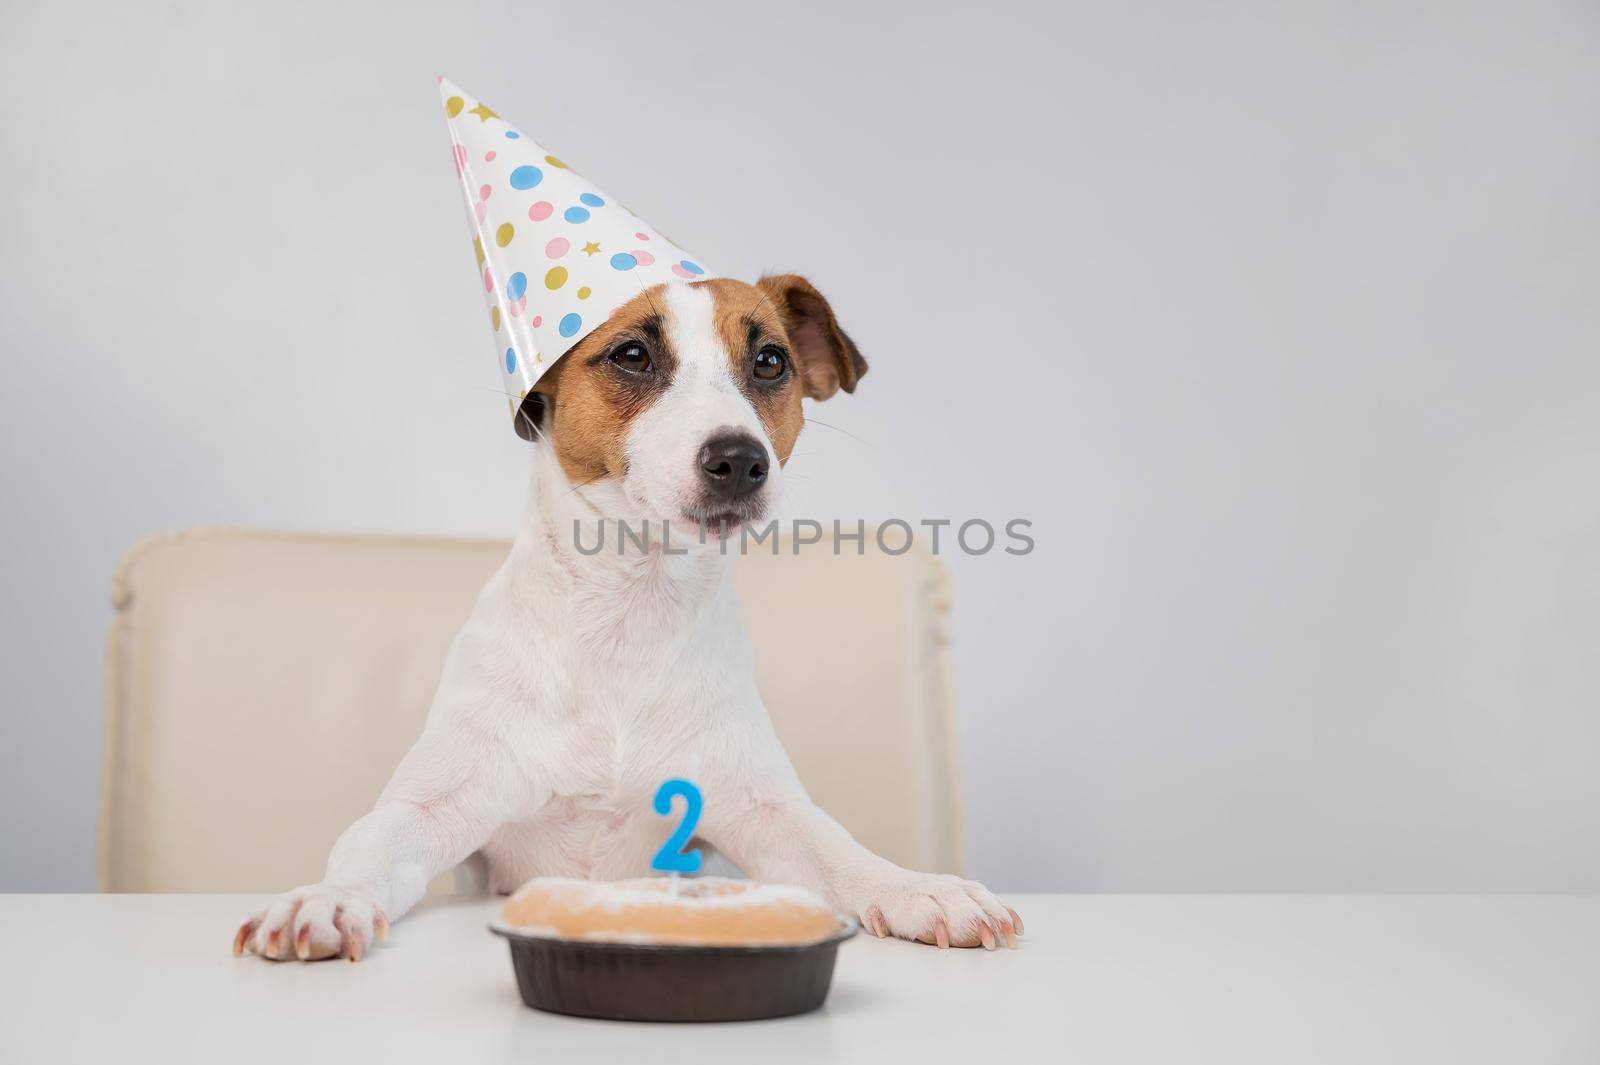 Jack russell terrier in a festive cap by a pie with a candle on a white background. The dog is celebrating its second birthday by mrwed54